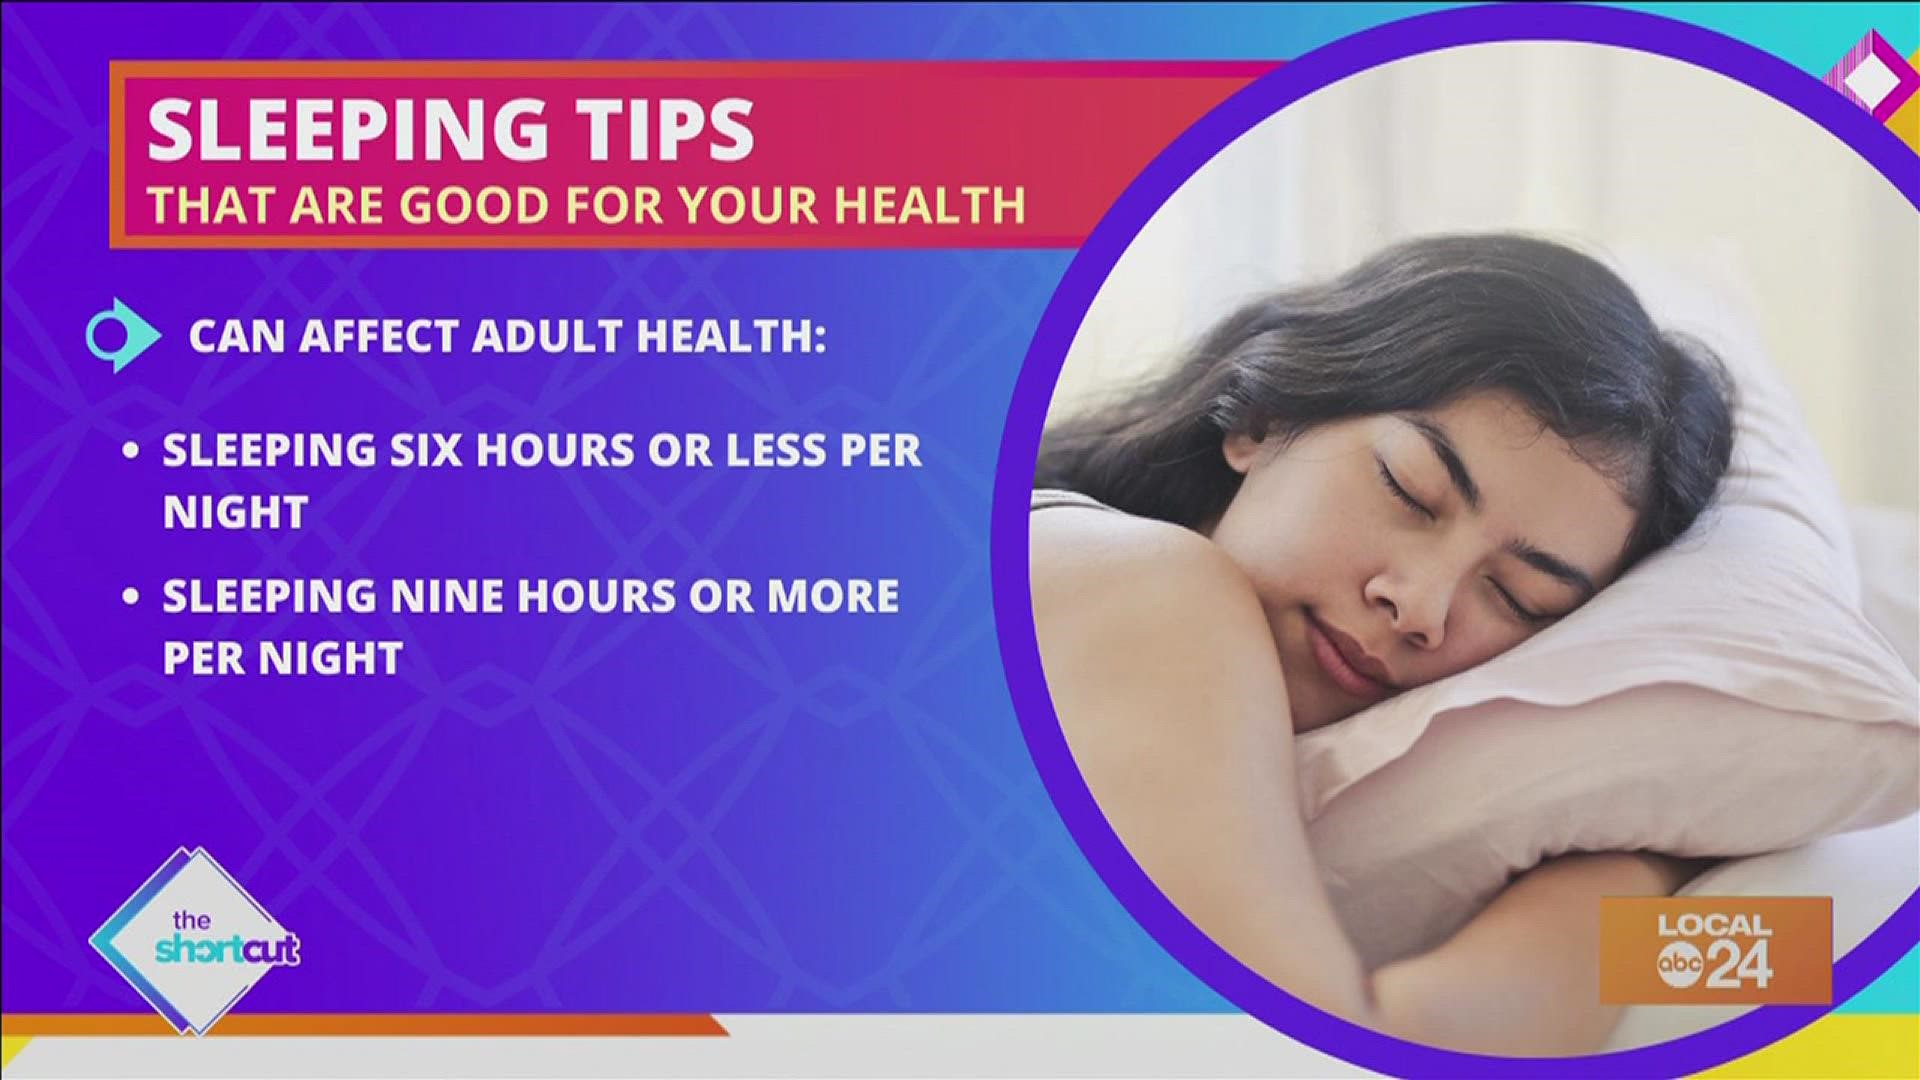 Did you know that too much sleep is bad for your health? Join Sydney Neely on "The Shortcut" for tips on how to sleep healthy!